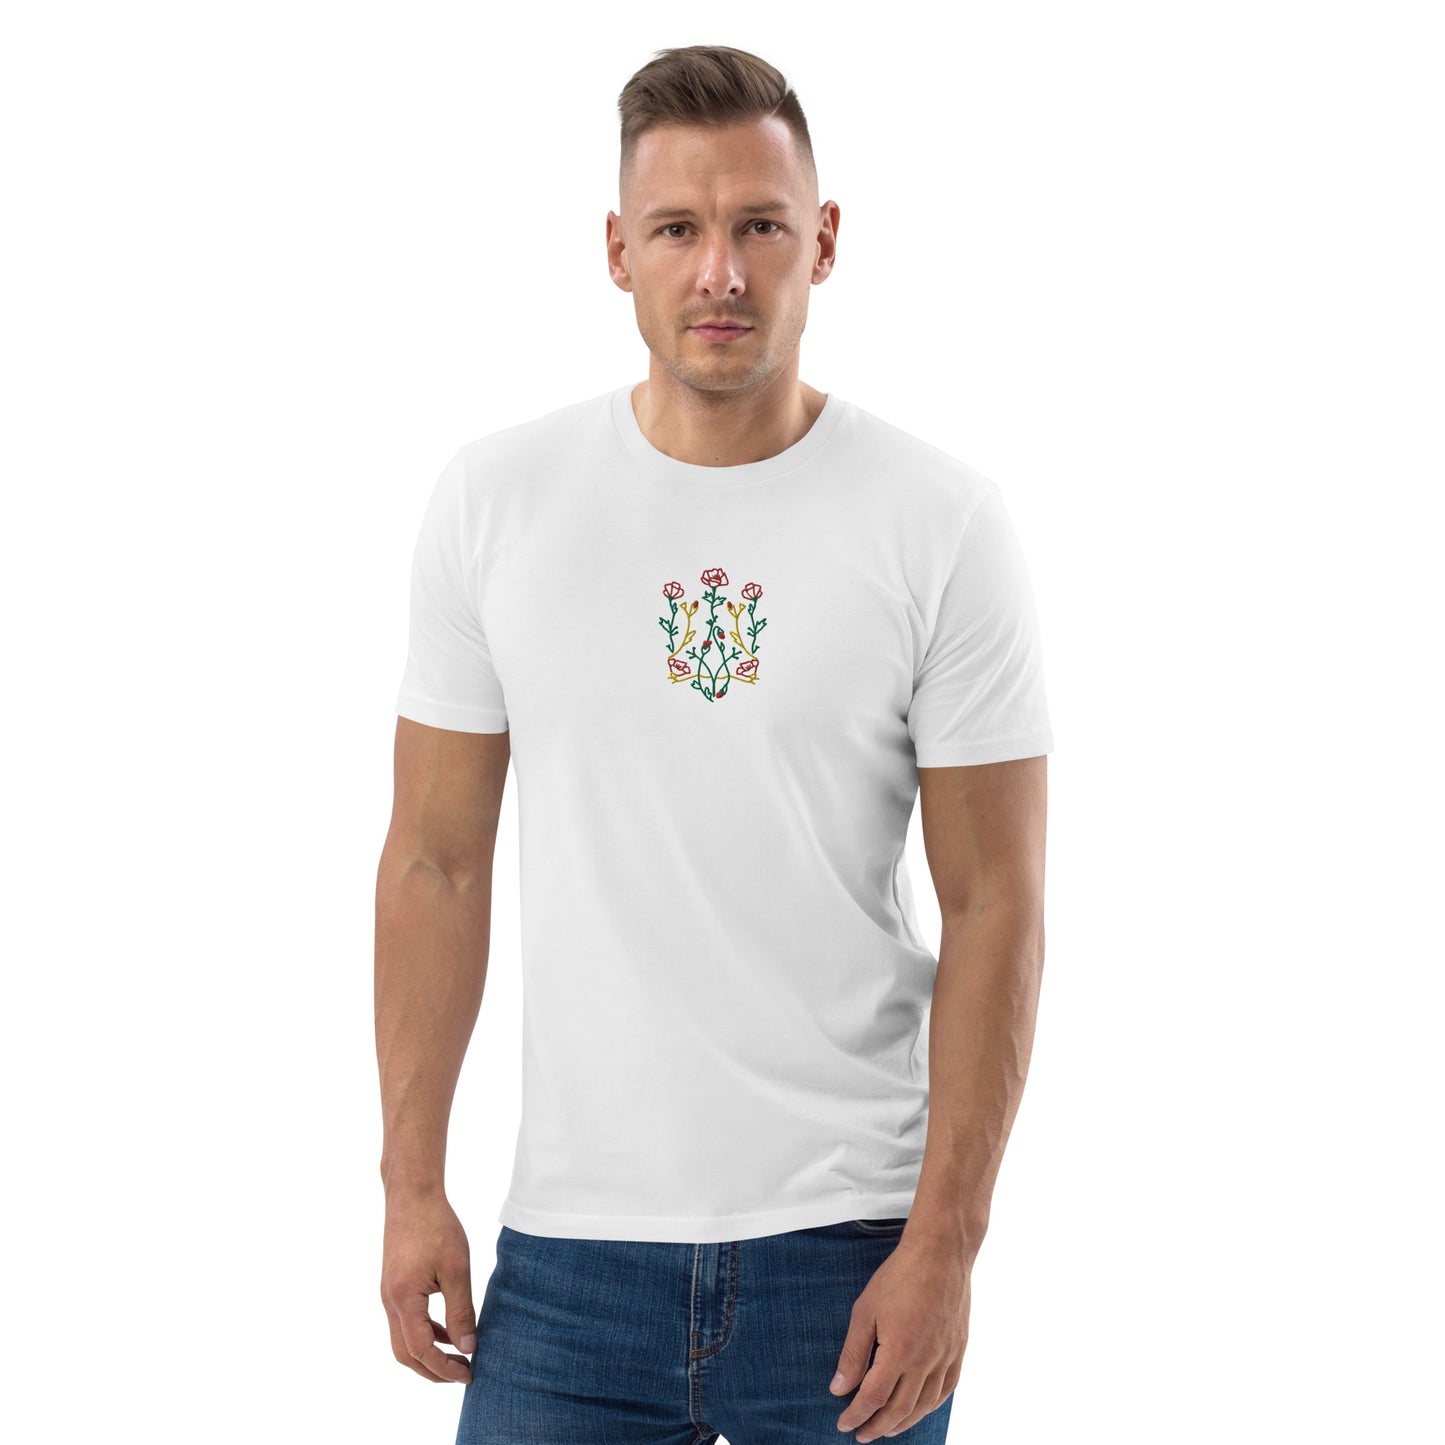 Flower Trident by @vanilin_decor embroidered unisex organic cotton t-shirt in white